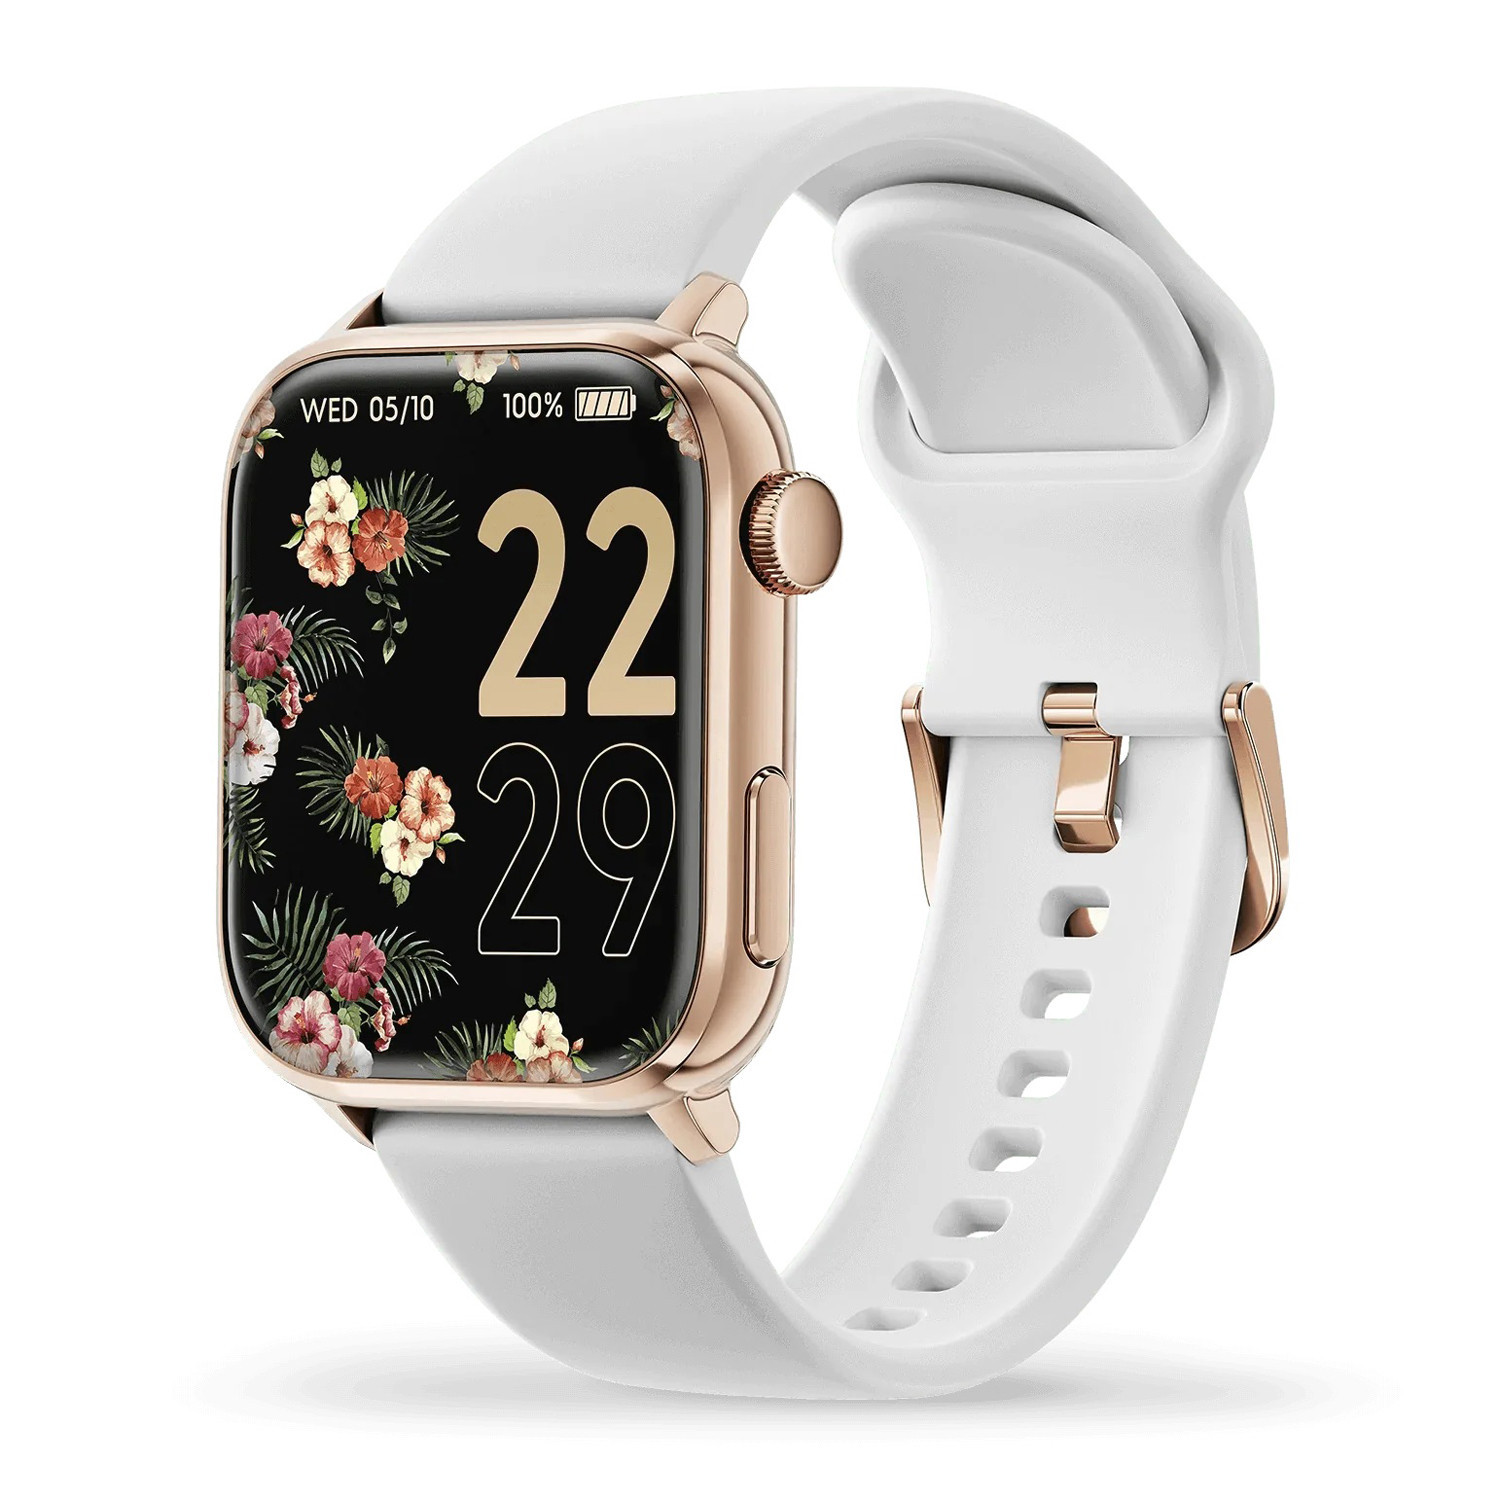 Montre femme Ice Watch connectée Ice Smart two
rose-gold amoled